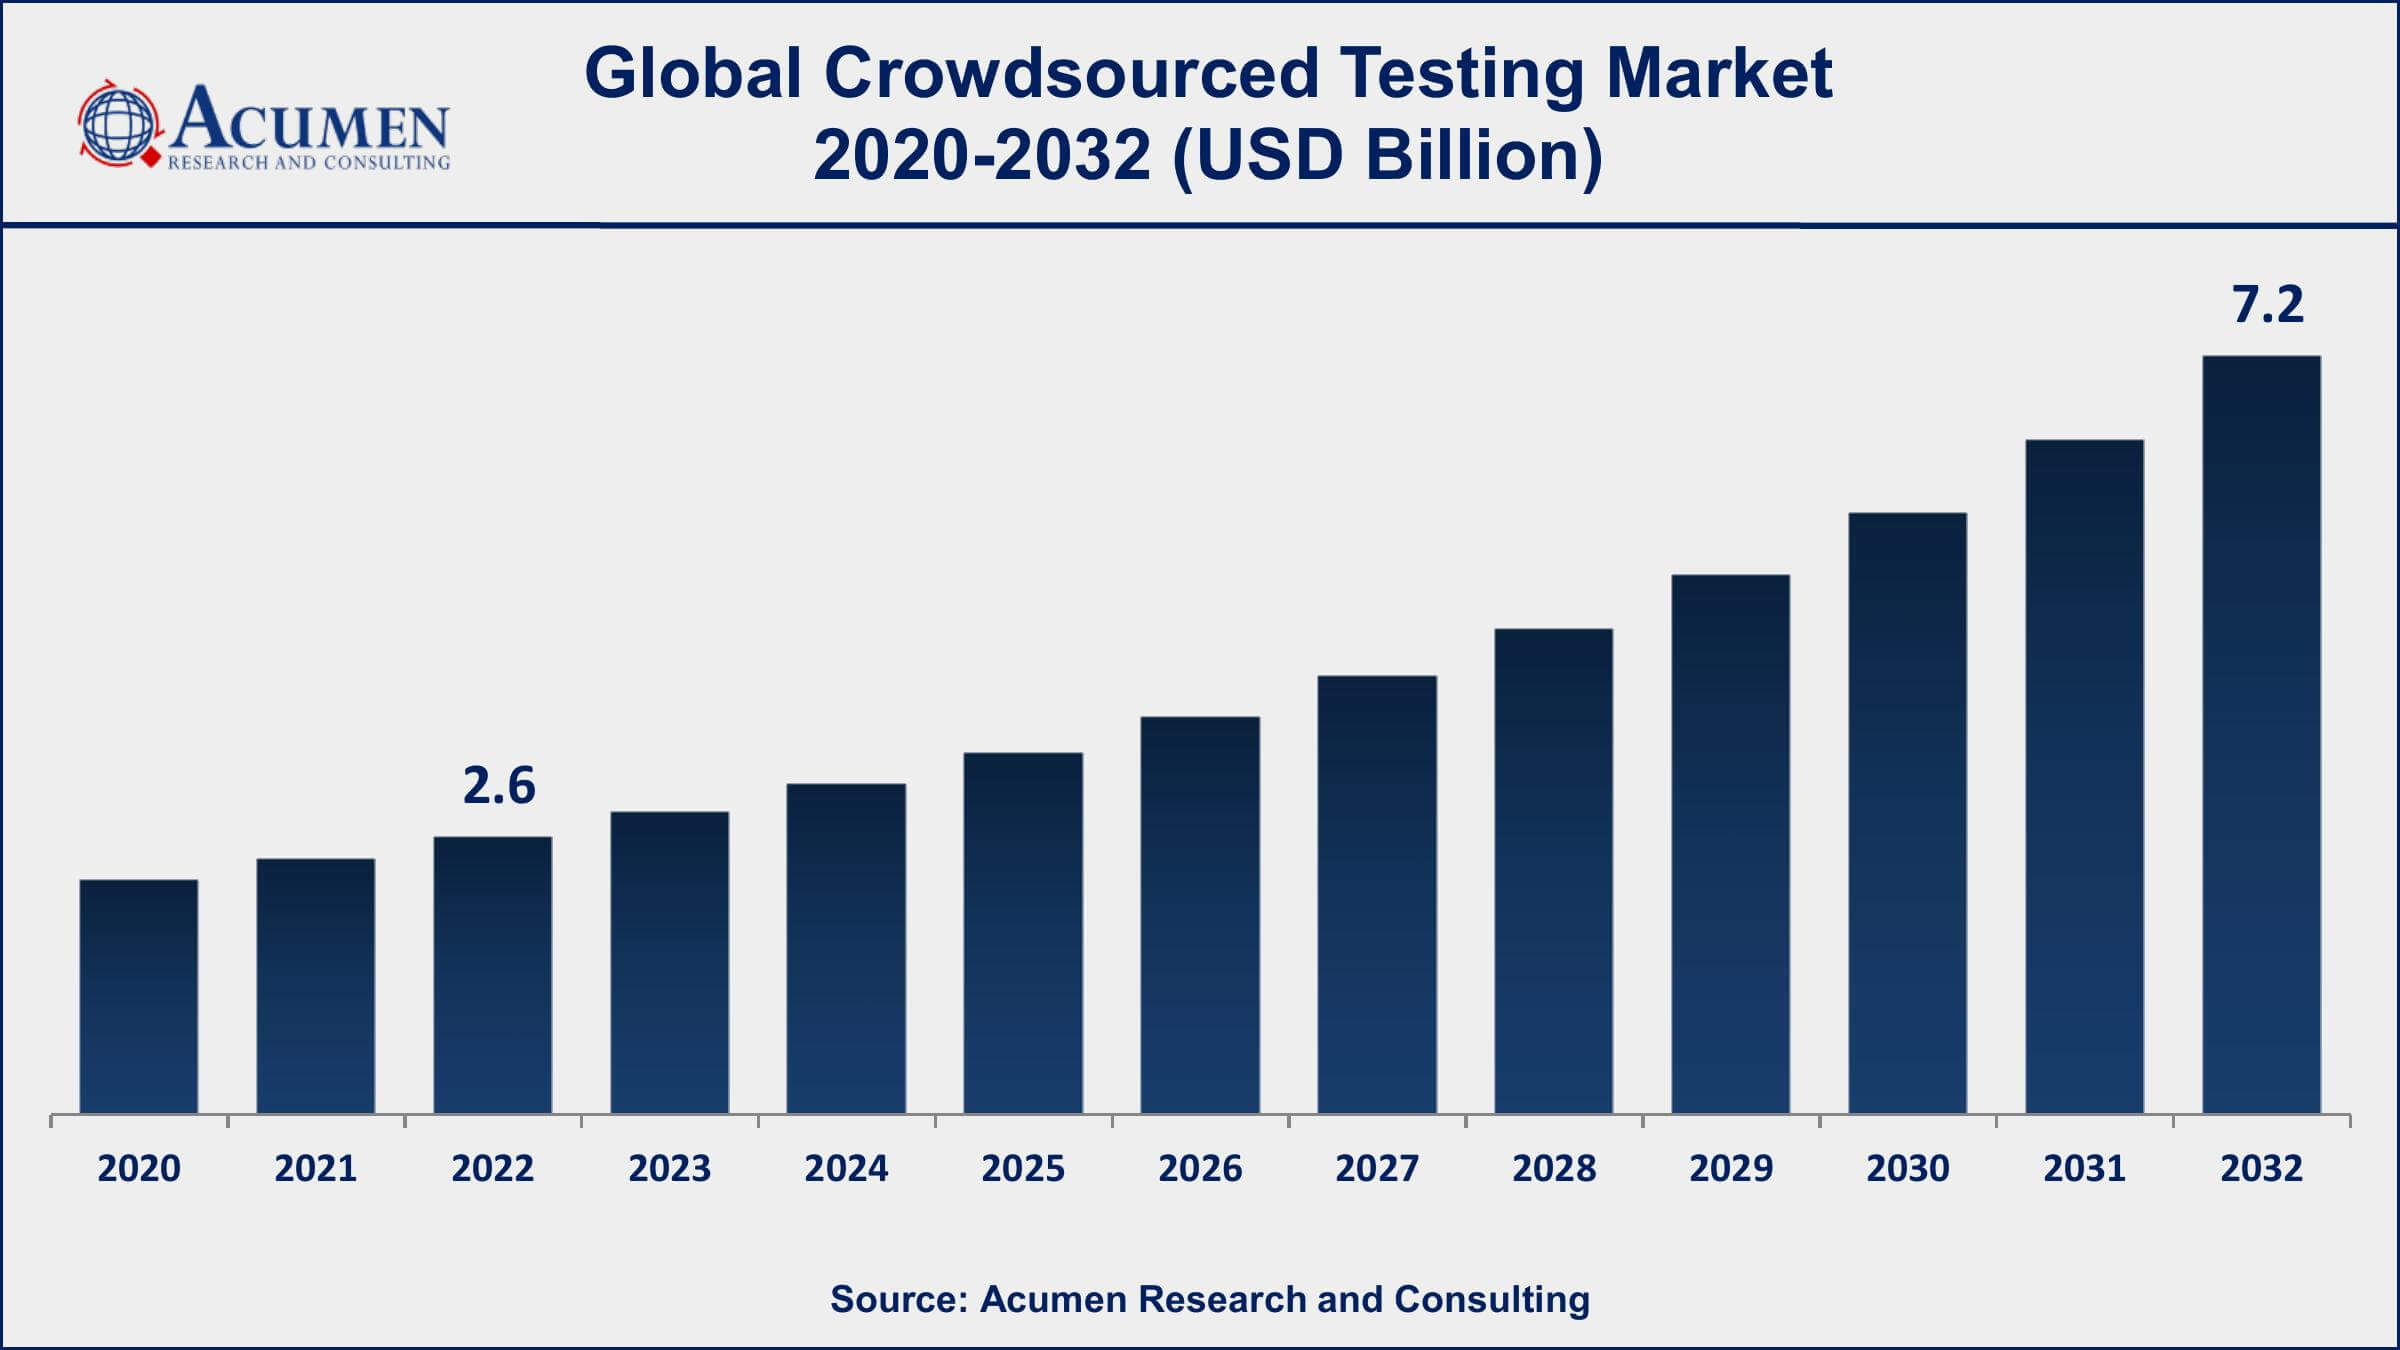 Crowdsourced Testing Market Drivers